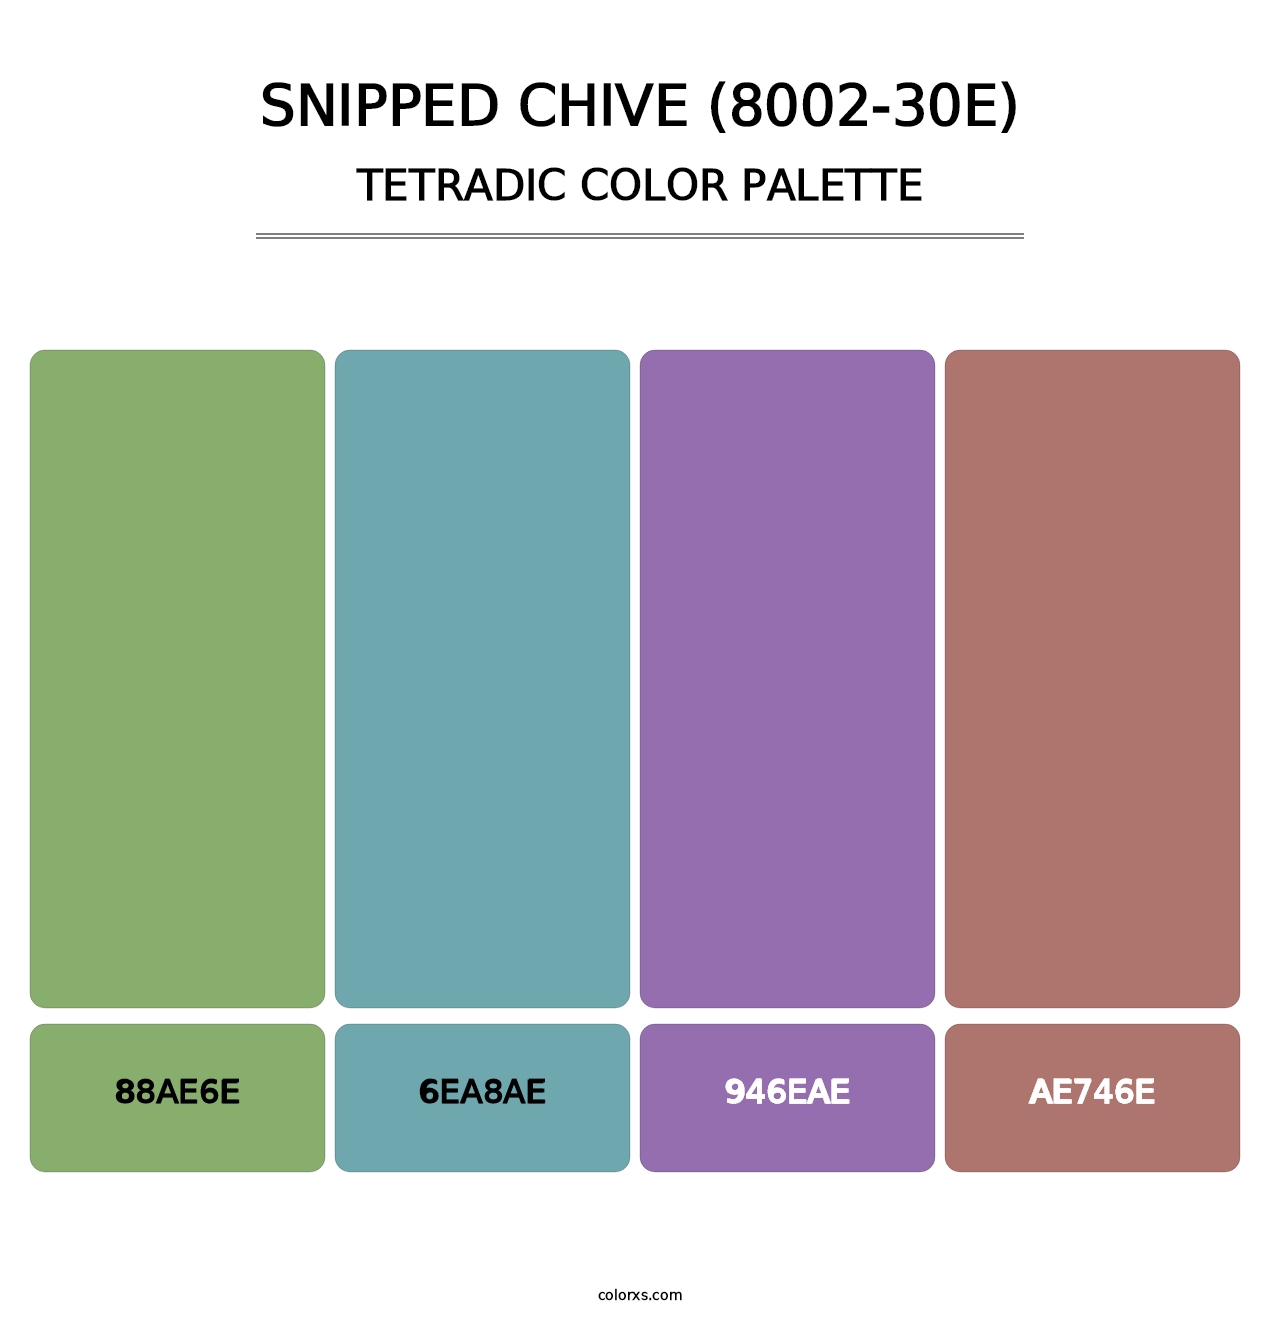 Snipped Chive (8002-30E) - Tetradic Color Palette